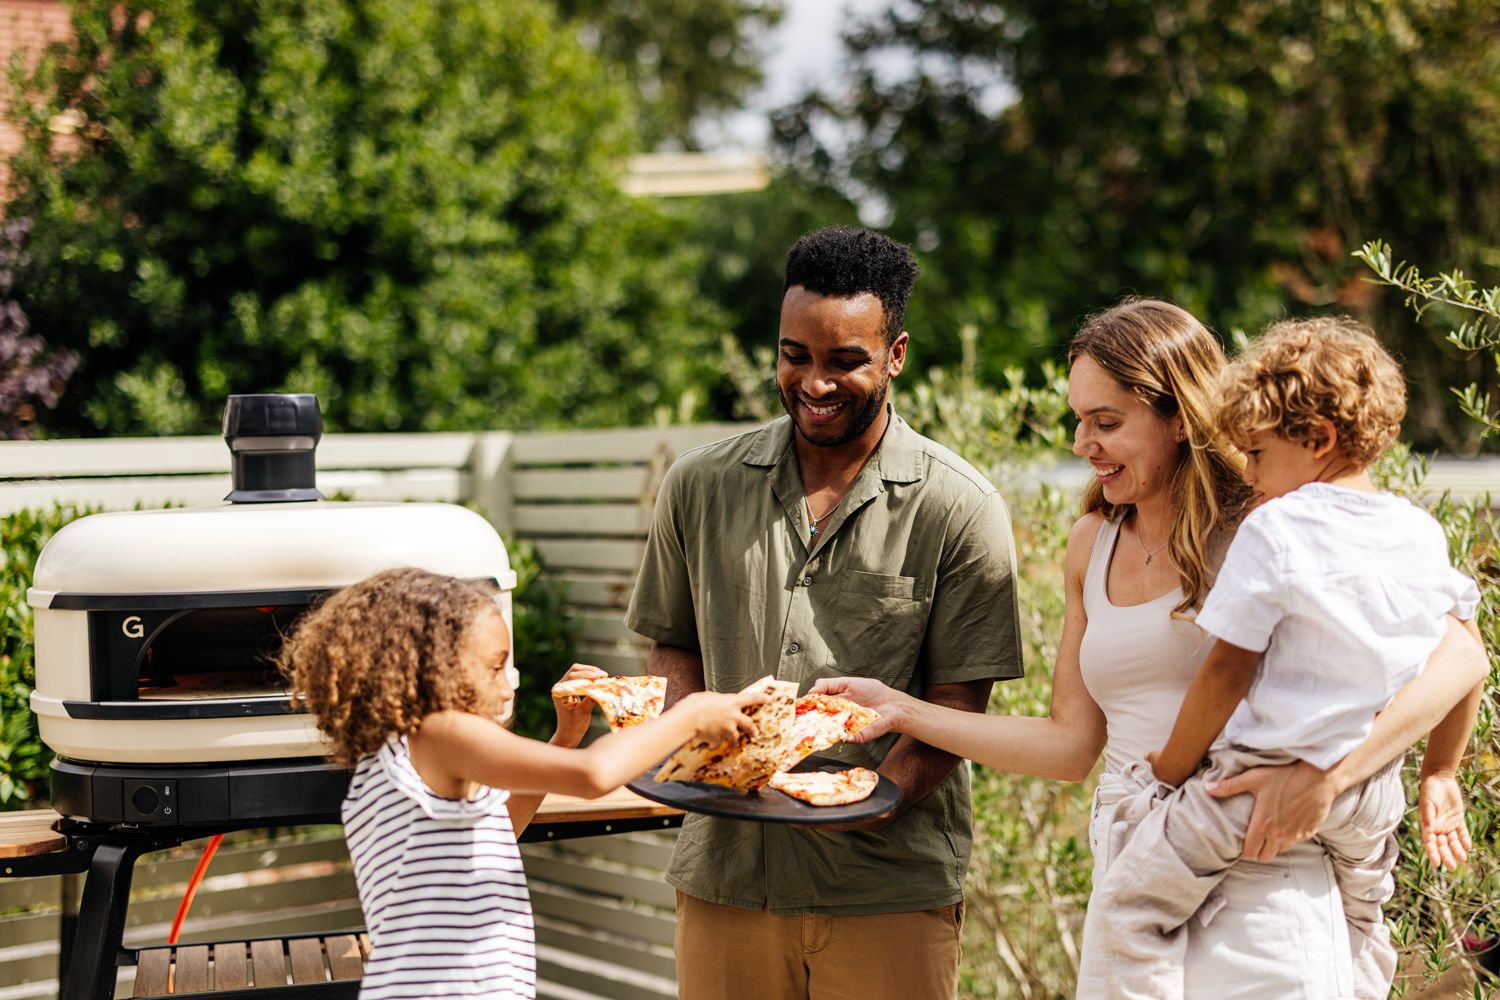 Image of a gas Gozney pizza oven with a family around it taking their pizza out